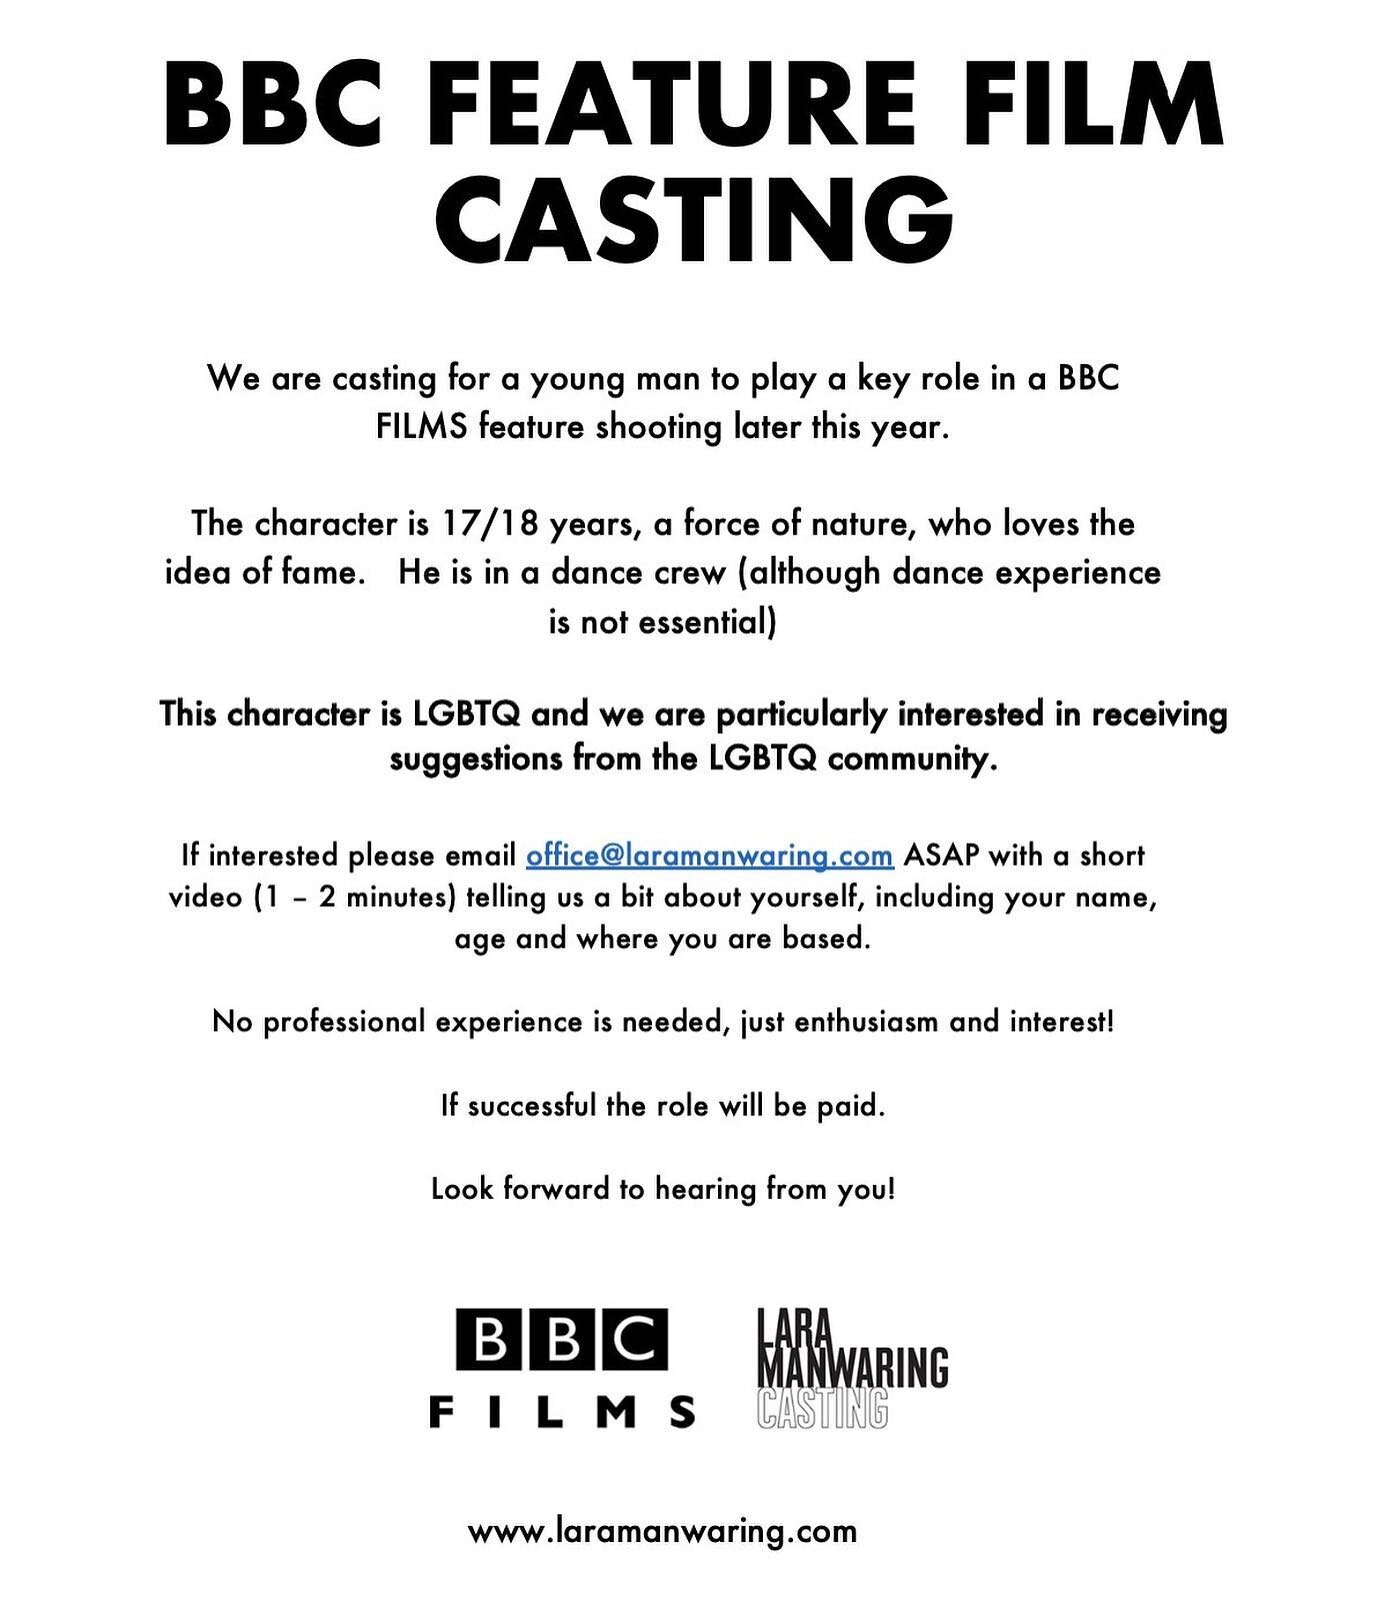 ** UK - FILM CASTING **
LARA MANWARING CASTING are casting a young LGBTQ man - character is aged 17/18, who loves the idea of fame and a force to be reckoned with. Particularly interested in receiving apps from the LGBTQ community. If this is you get